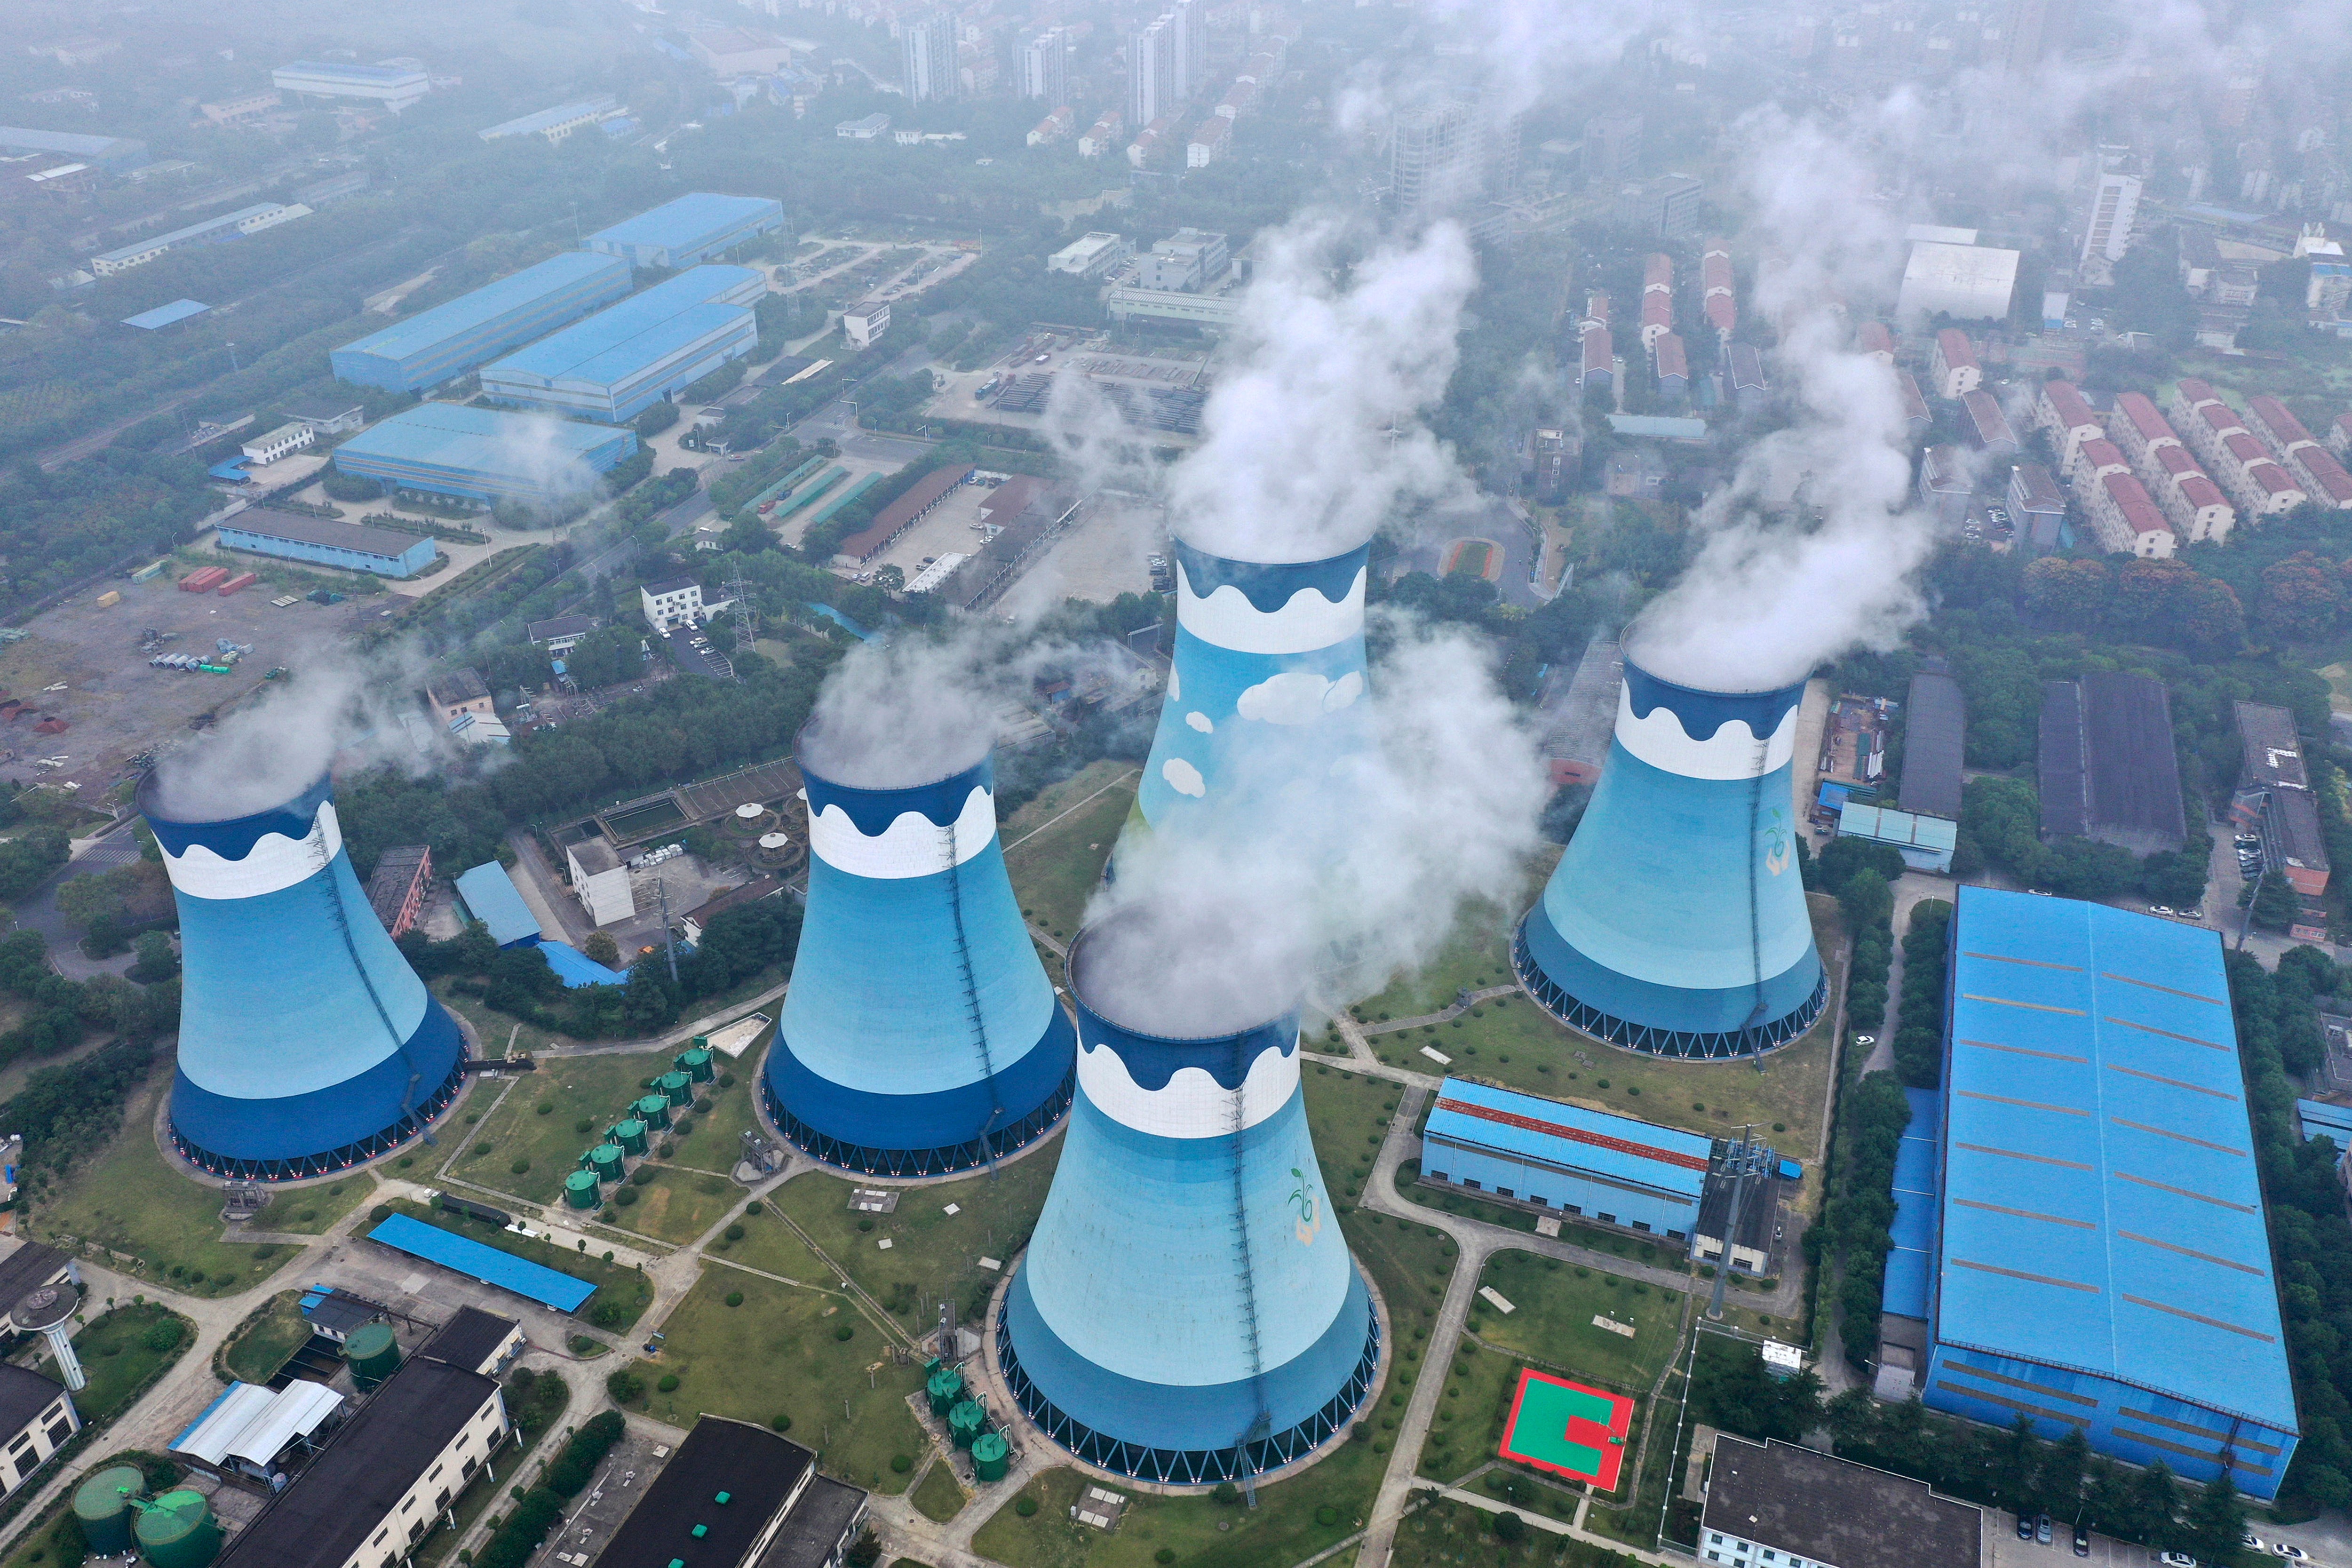 Steam billows out of the cooling towers at a coal-fired power station in Nanjing in east China's Jiangsu province. Global shoppers face possible shortages of smartphones and other goods ahead of Christmas